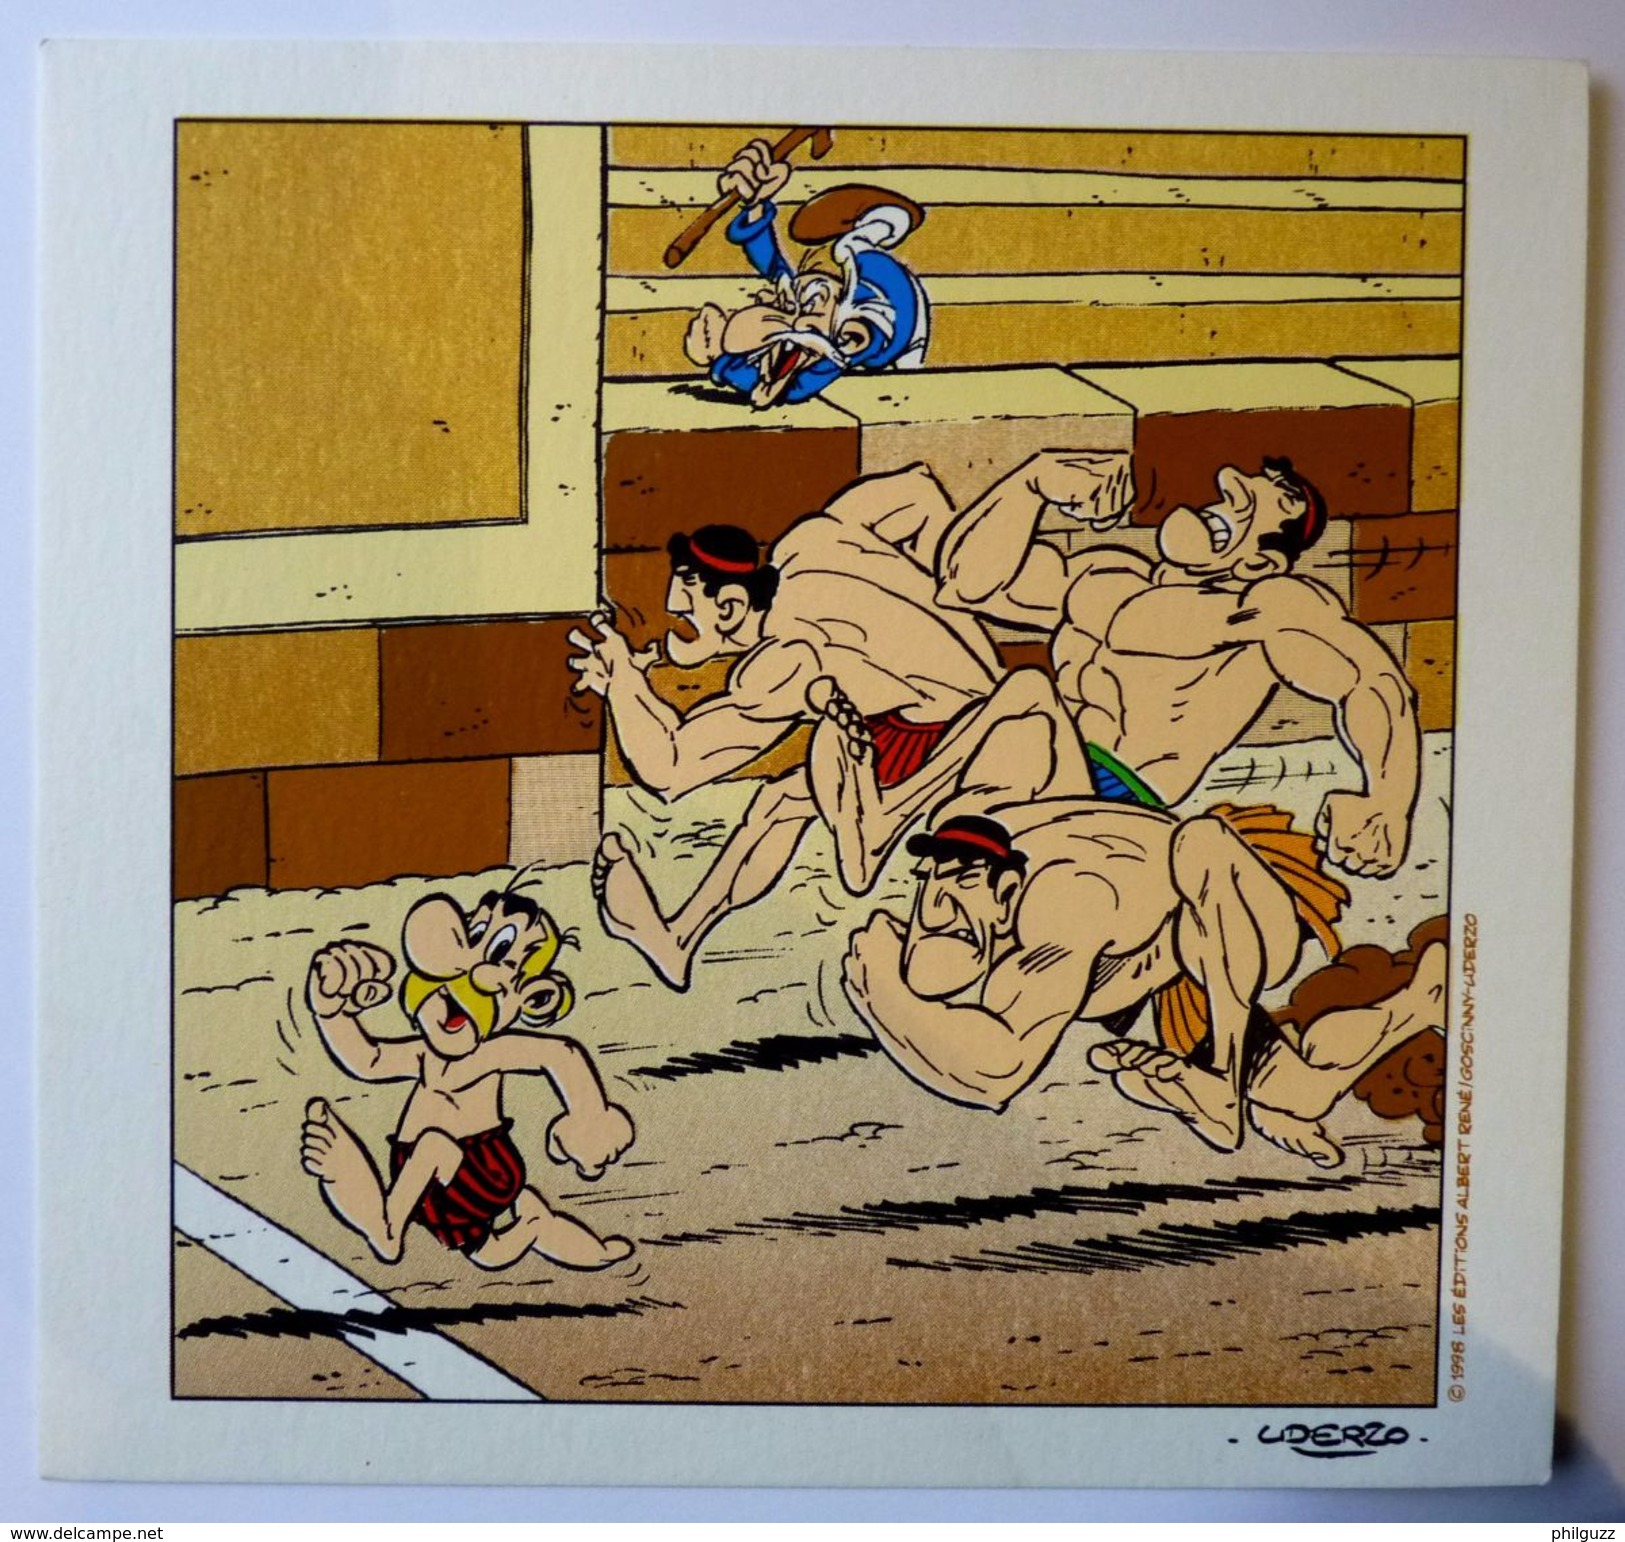 SERIGRAPHIE TDK ASTERIX AUX JEUX OLYMPIQUES 1998 - Screen Printing & Direct Lithography